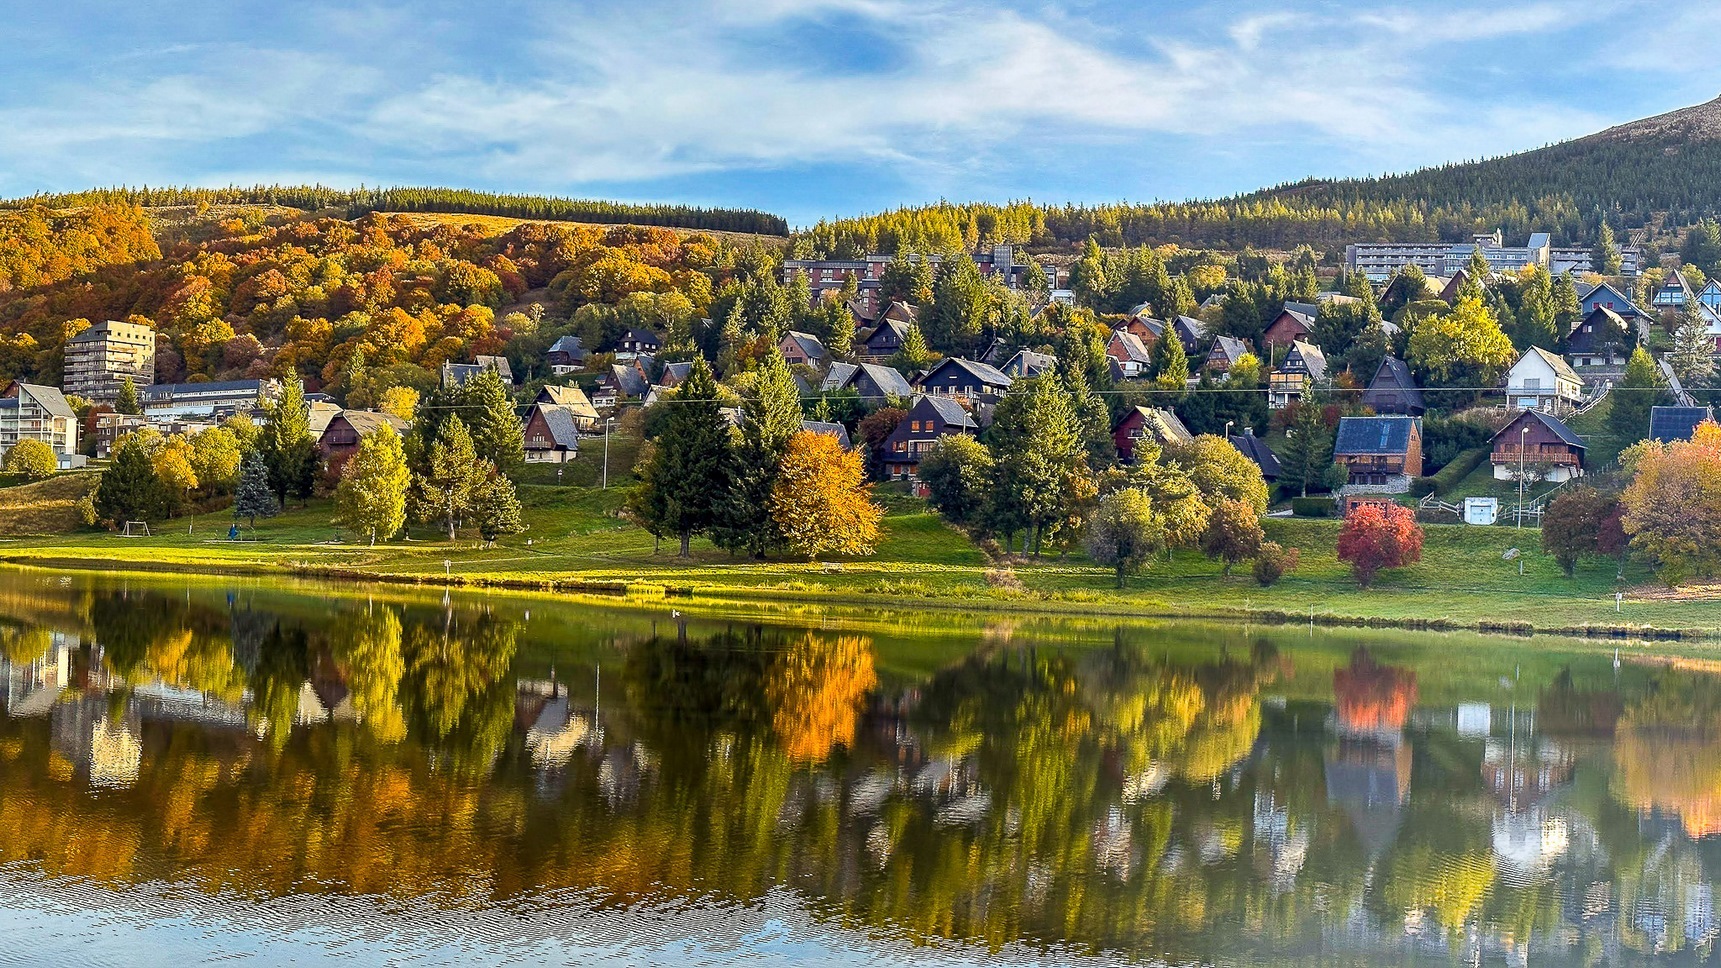 Super Besse in Autumn, pretty reflections on the Lac des Hermines in Super Besse